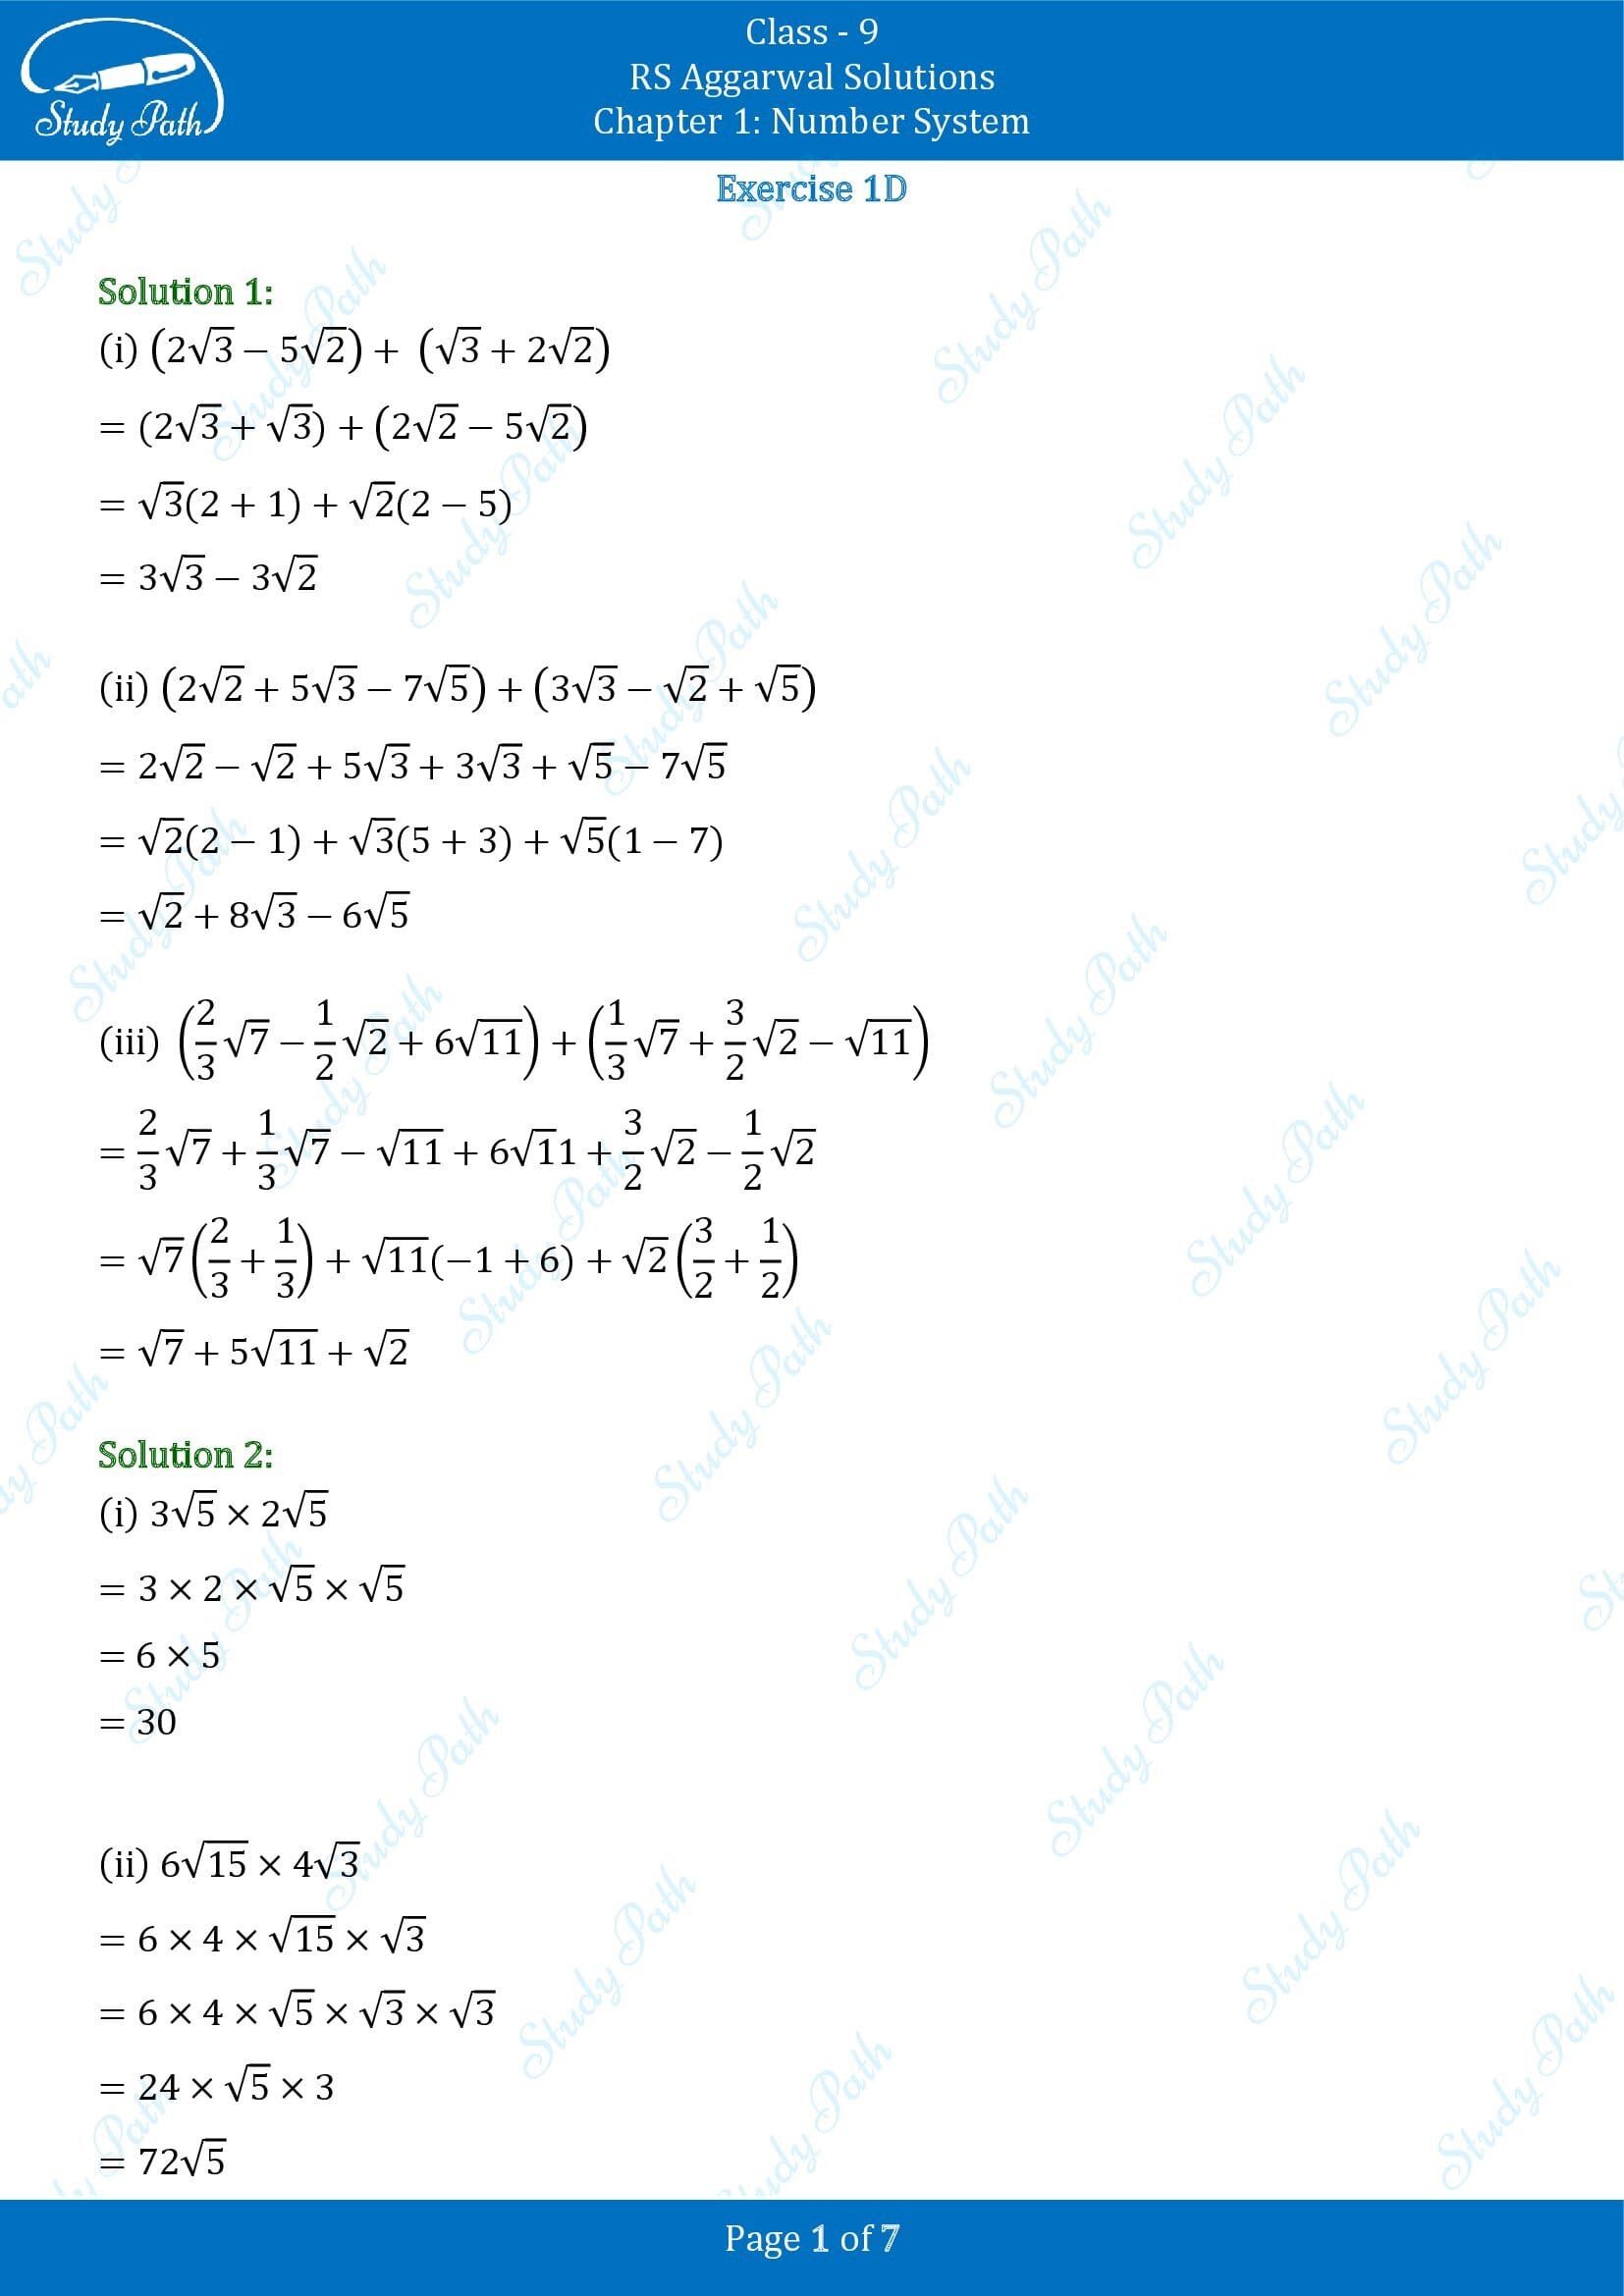 RS Aggarwal Solutions Class 9 Chapter 1 Number System Exercise 1D 00001